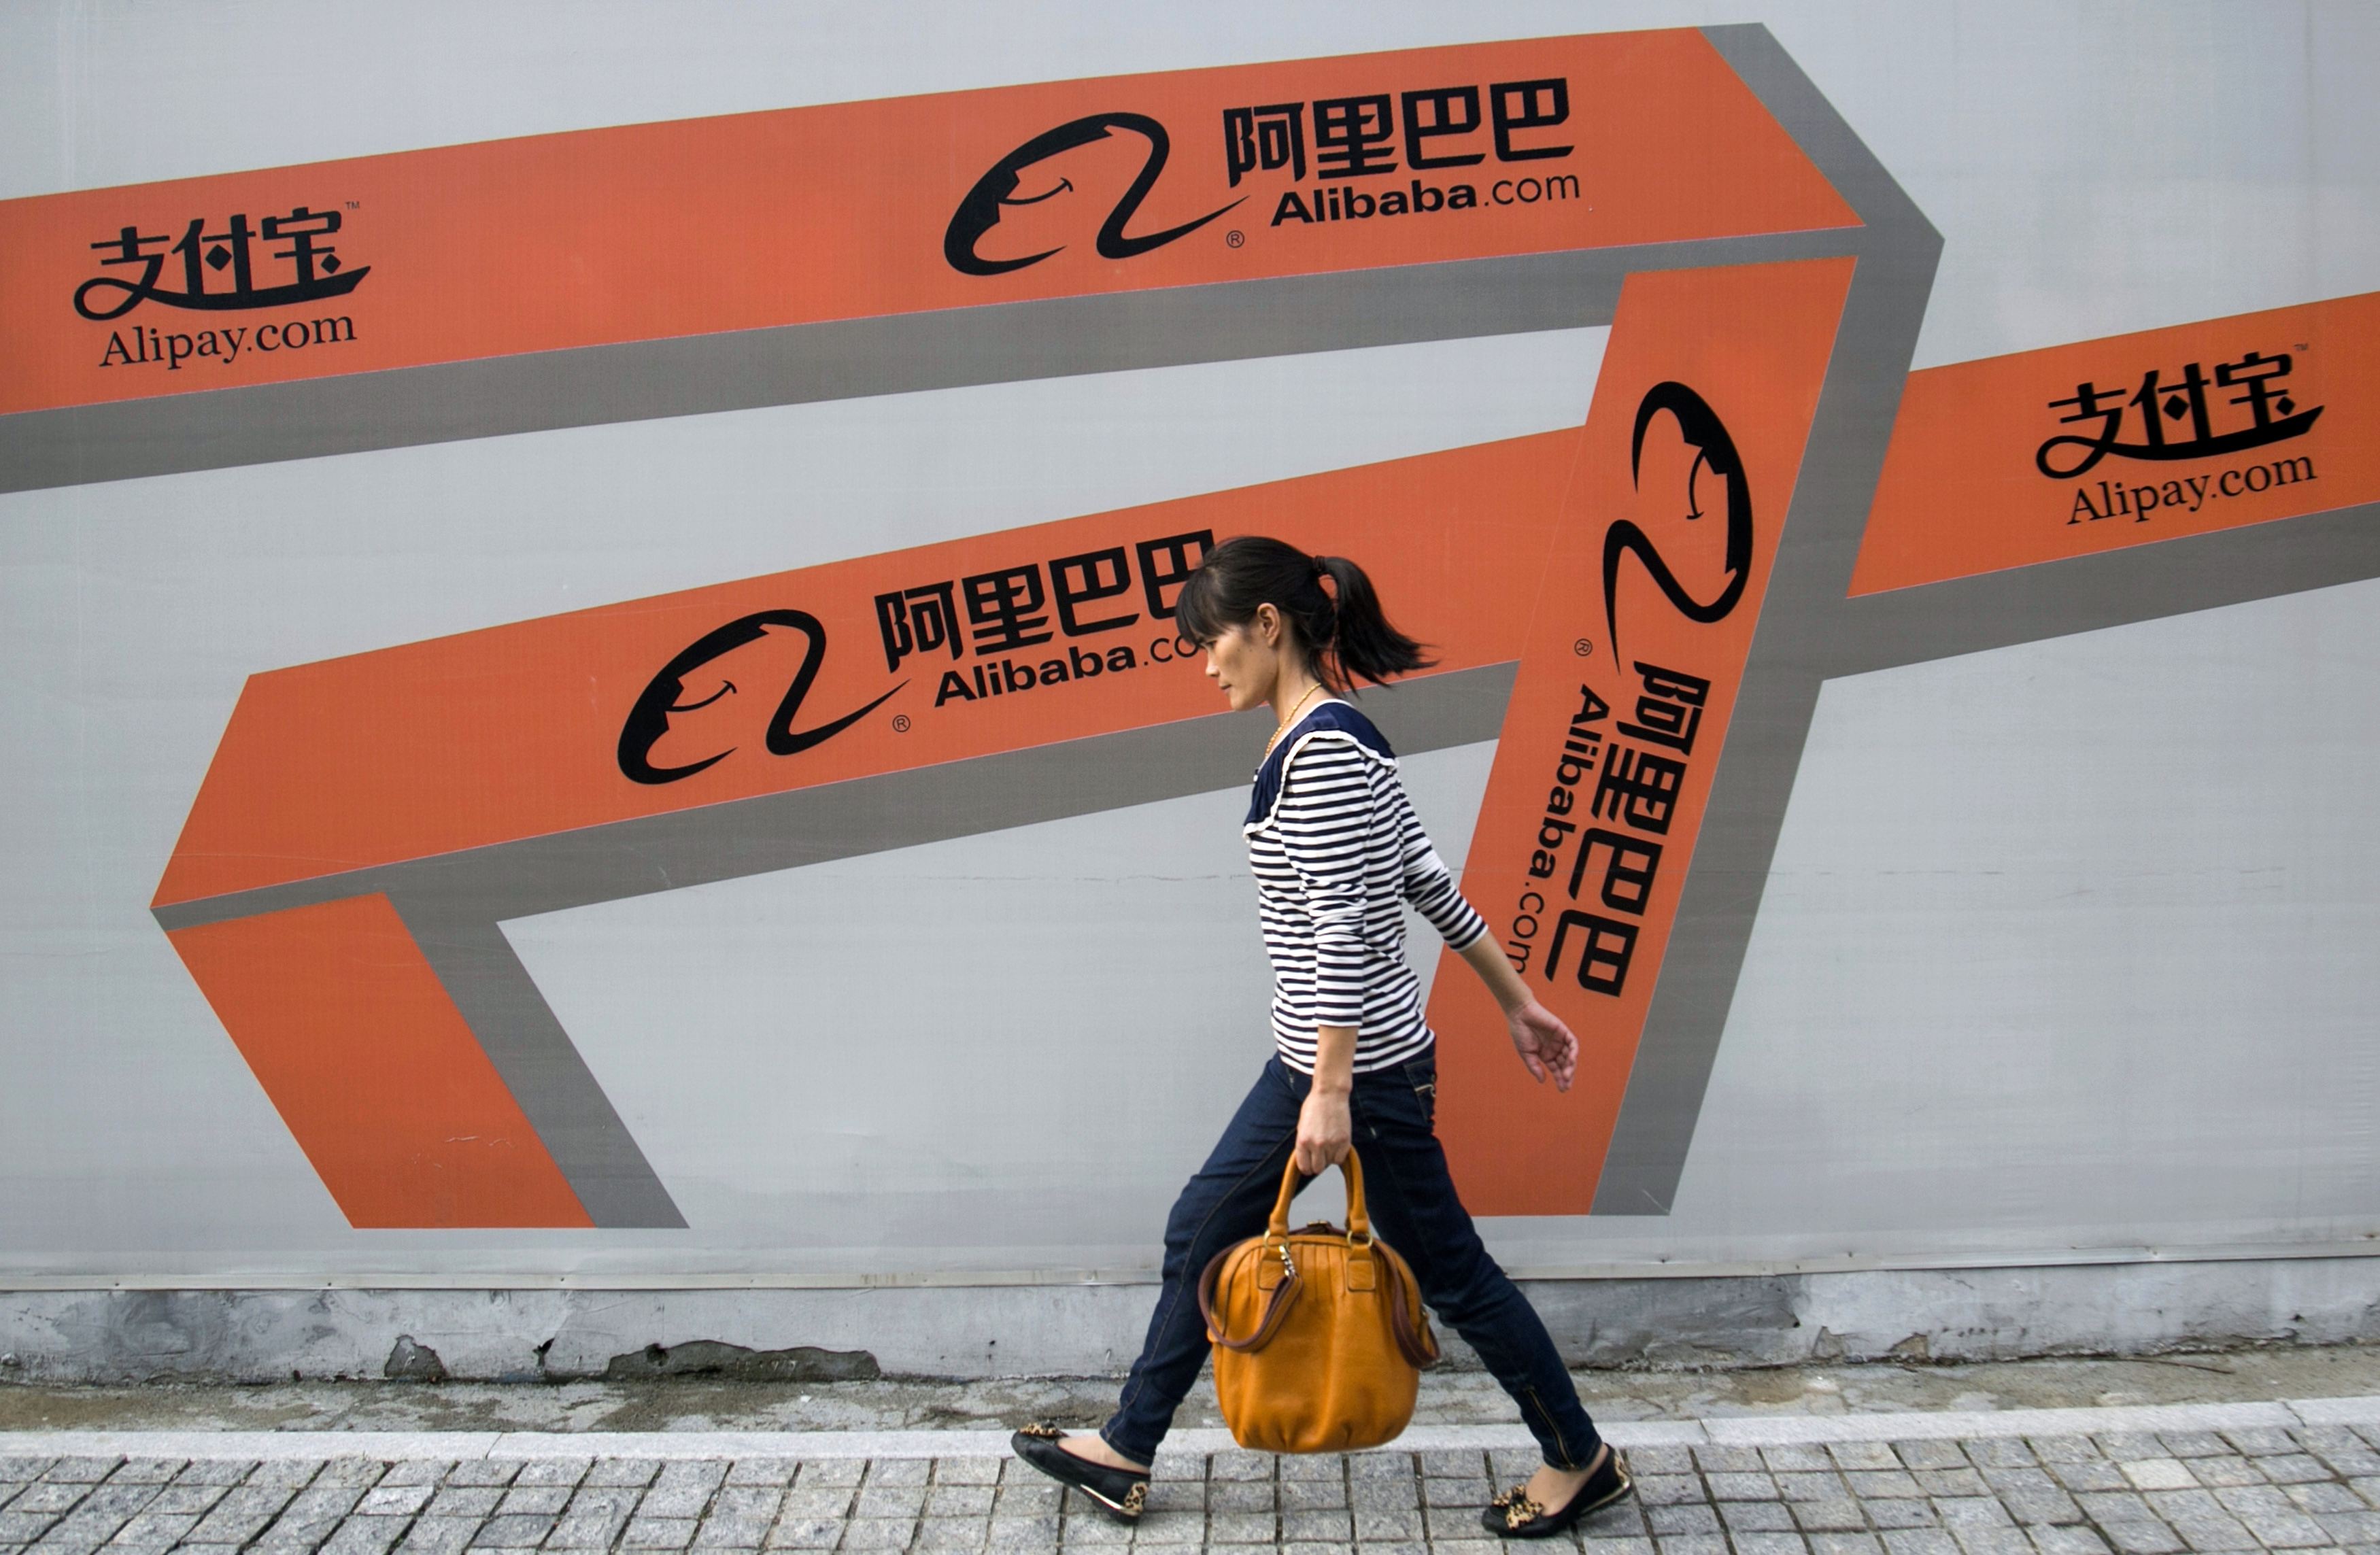 A woman walks past an Alibaba advertisement on a wall in Hangzhou, Zhejiang province, in this file picture taken September 26, 2013. Alibaba Group Holding will not change its partnership structure in order to list on the Hong Kong stock exchange, Executive Vice Chairman Joe Tsai told Reuters in an exclusive interview in Hong Kong on March 12, 2014. To match Interview ALIBABA-IPO/TSAI REUTERS/Chance Chan/Files (CHINA - Tags: BUSINESS LOGO) - RTX14096 CHINA OUT. NO COMMERCIAL OR EDITORIAL SALES IN CHINA